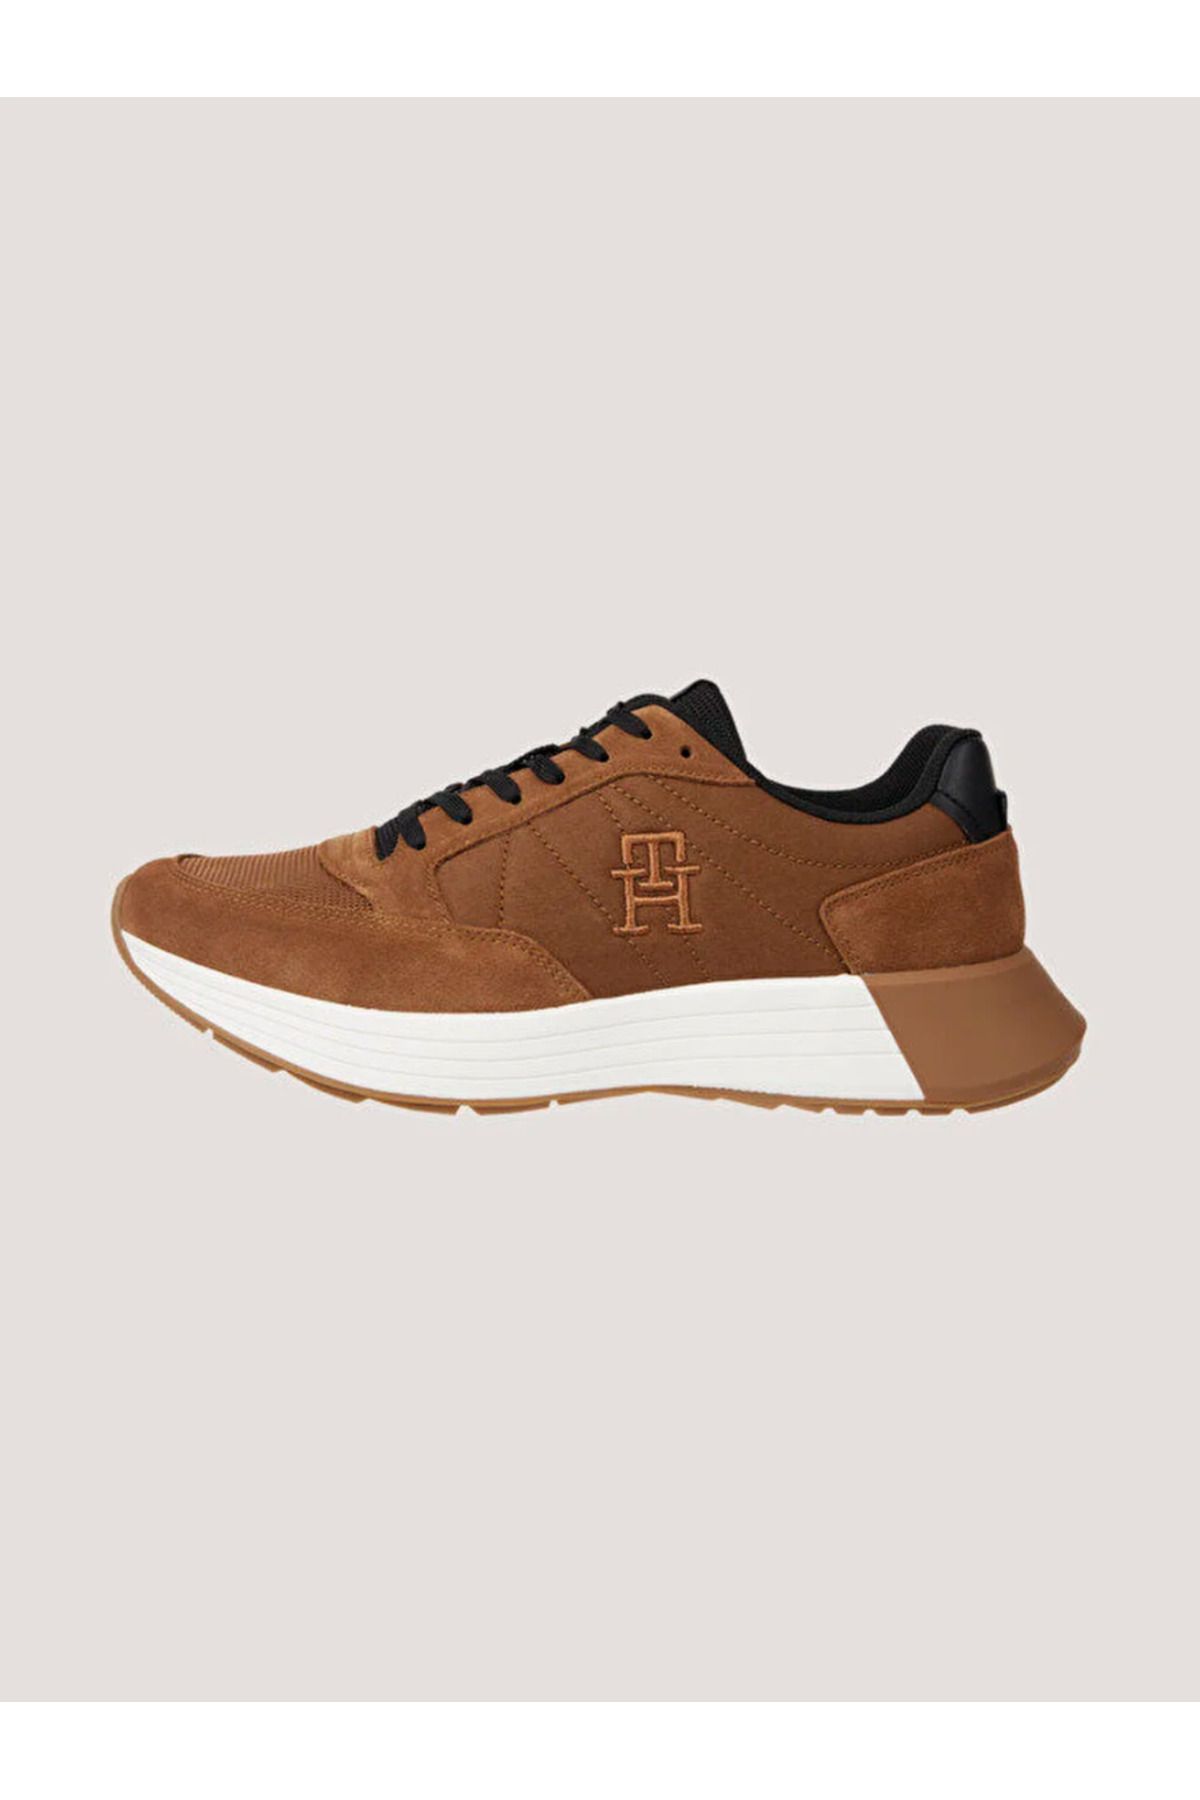 Tommy Hilfiger Classics Elevated TH Monogram Runner Trainers